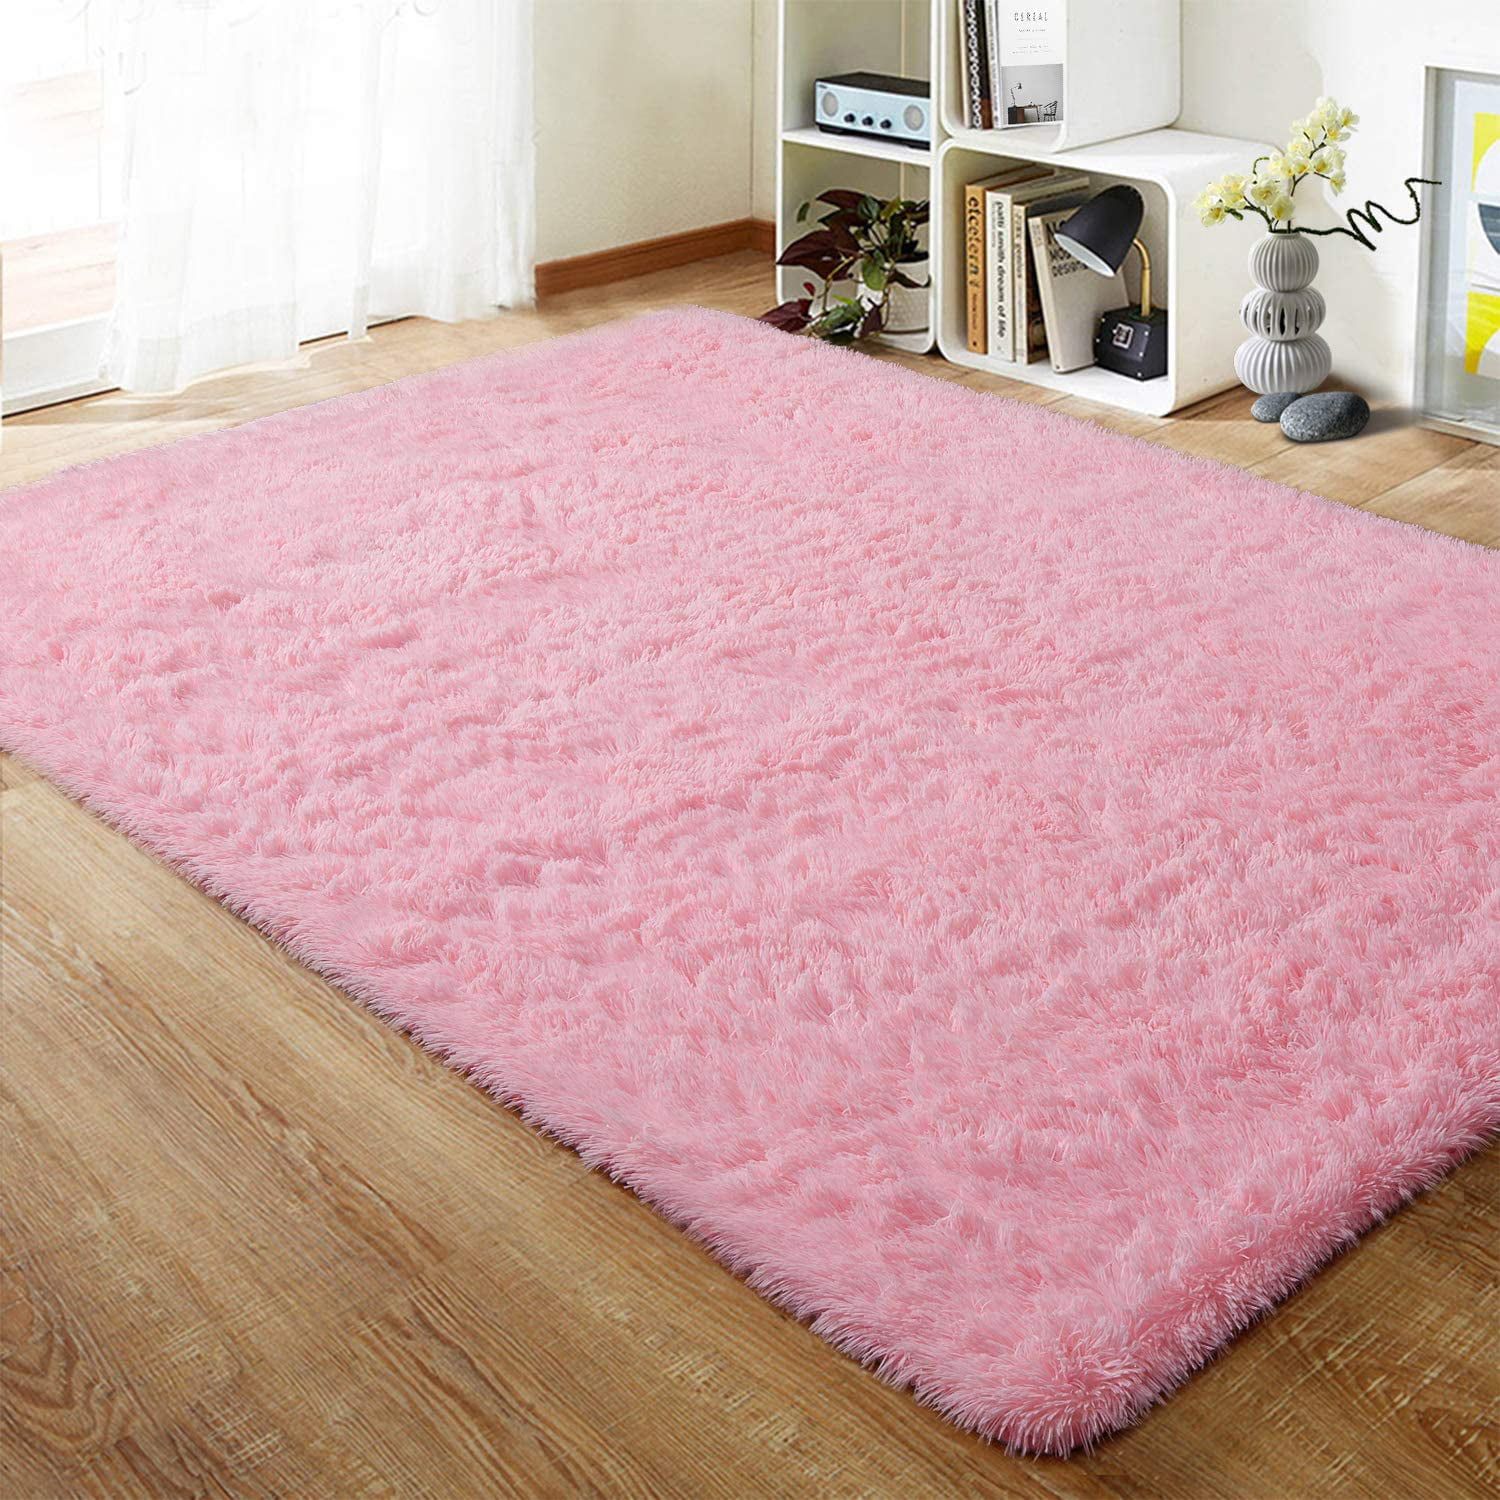 Lochas Soft Shag Carpet Fluffy Rug For Living Room Bedroom Big Area Rugs  Floor Mat, 4'x6',pink – Walmart Intended For Pink Soft Touch Shag Rugs (Photo 1 of 15)